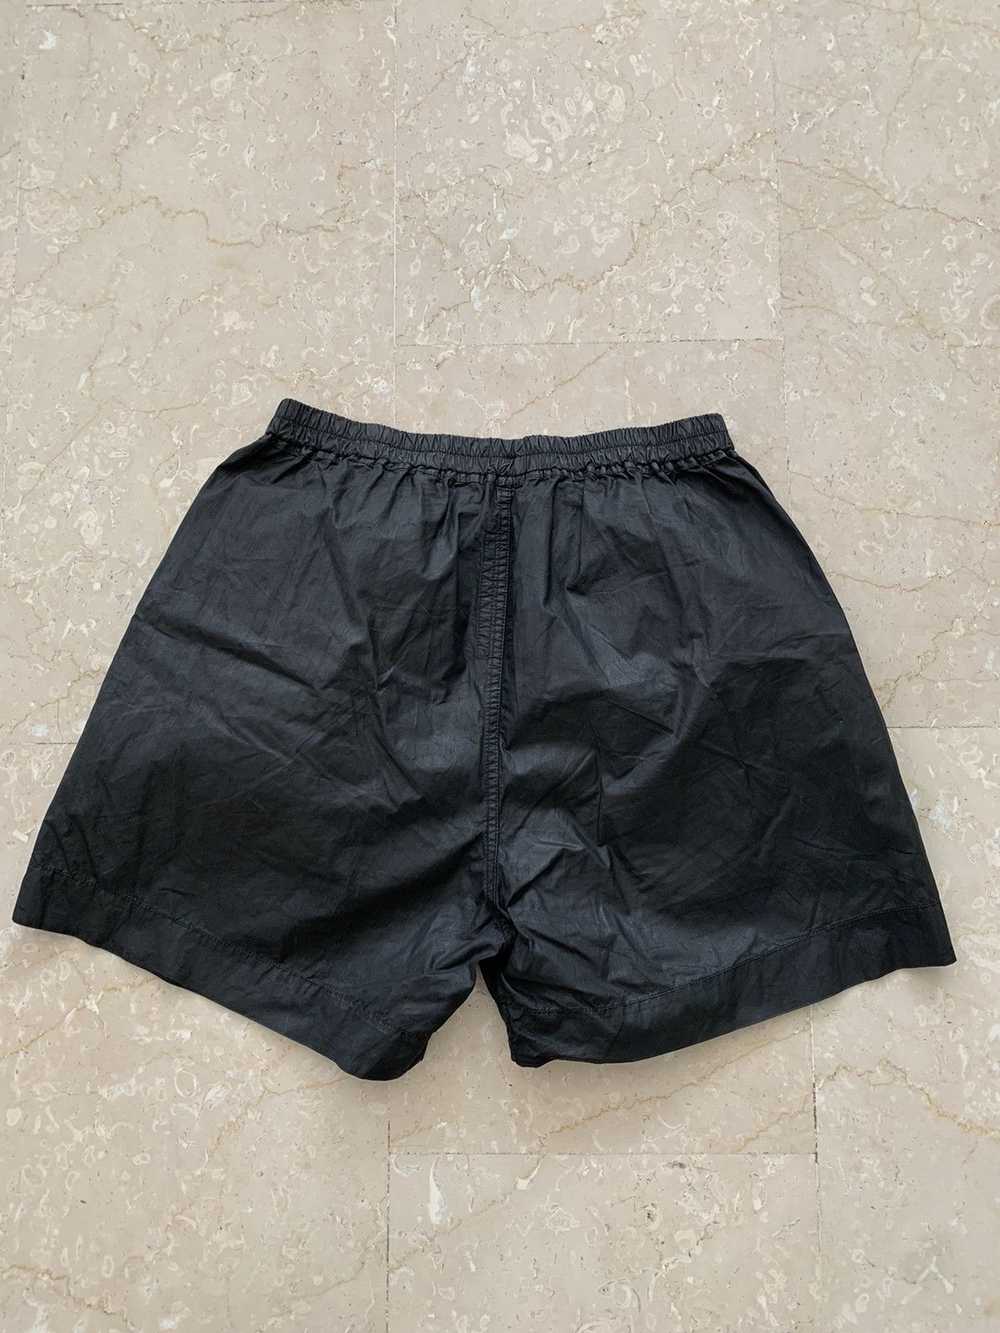 Rick Owens Drkshdw Waxed lightweight cotton shorts - image 6